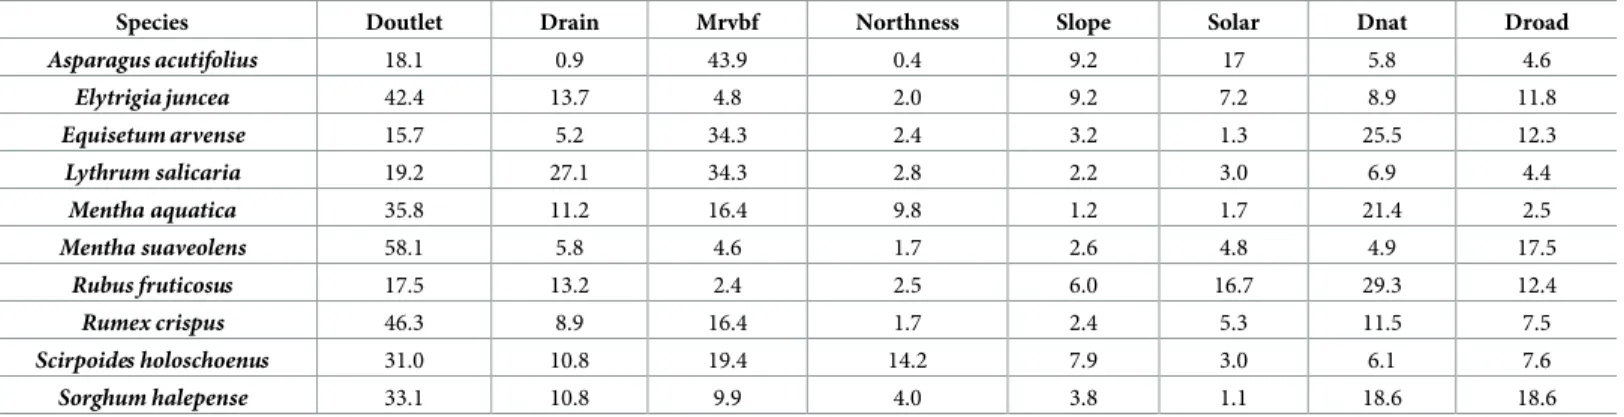 Table 4. Results for Maxent models for each species. Coefficients represent the relative importance of the explanatory variables (the sum of coefficients for each species is equal to 100)